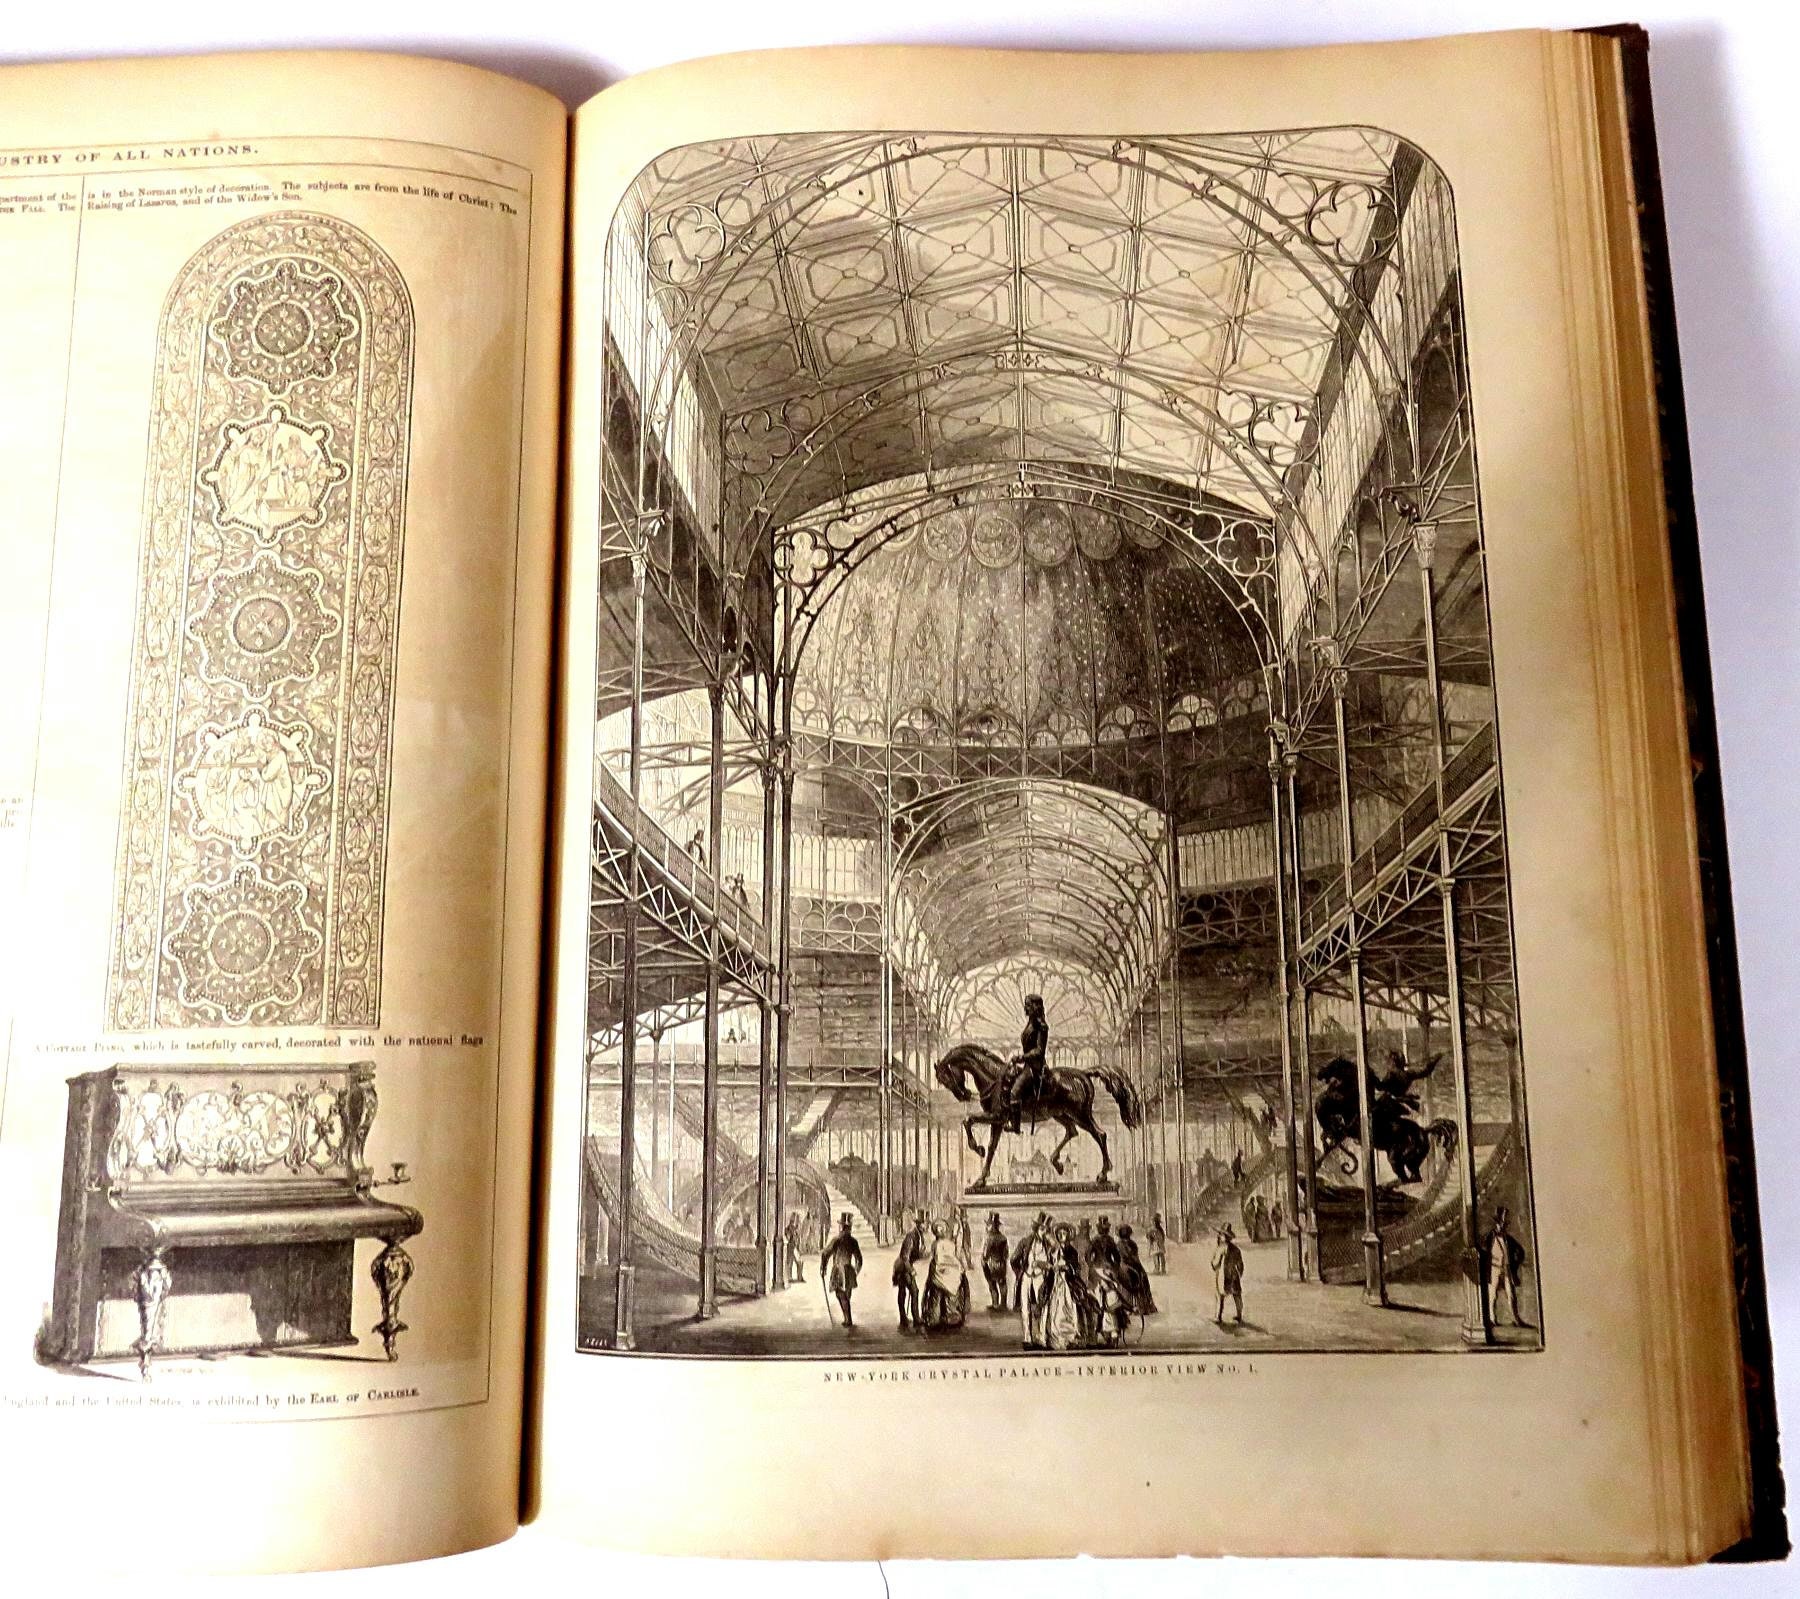 1854 BOOK CRYSTAL PALACE Exhibition New York500 -  India